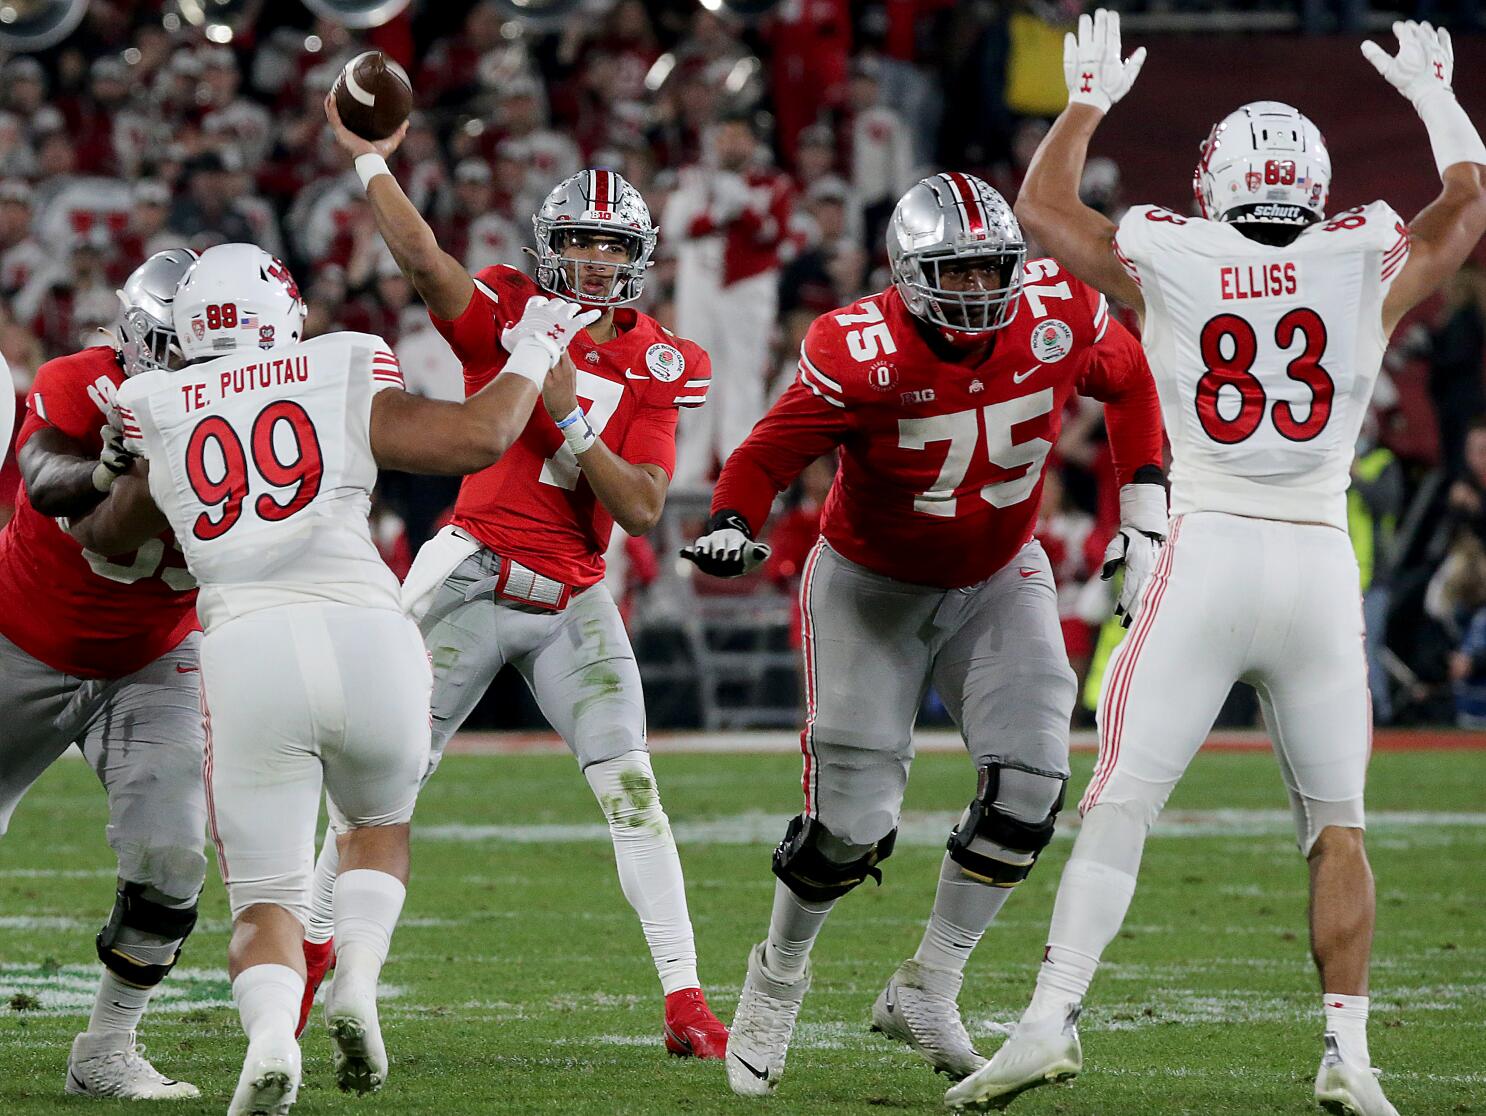 Ohio State football pivots to a defense-first mentality - ESPN